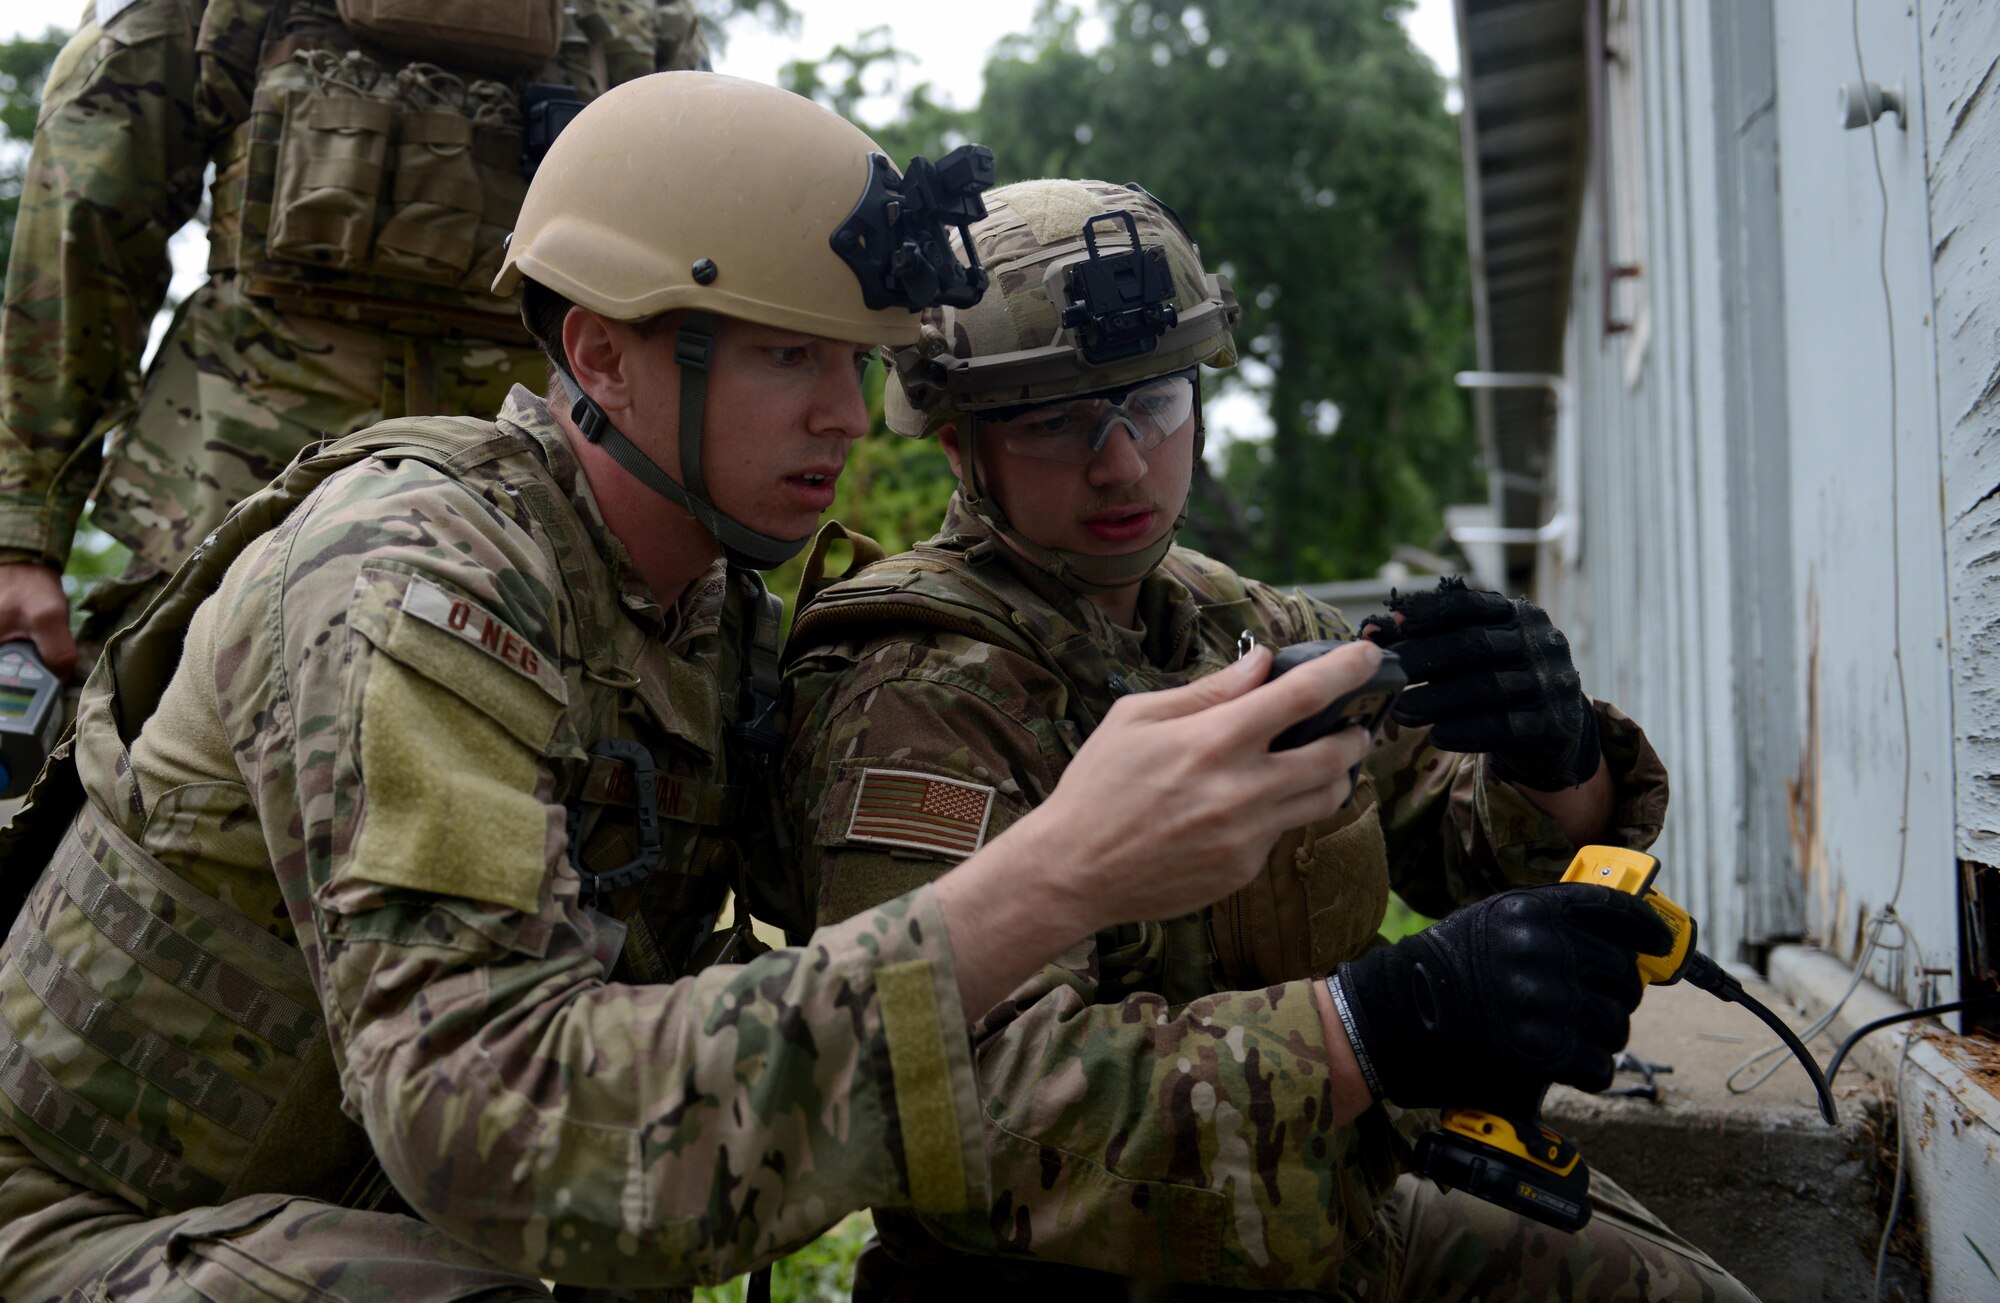 Staff Sgt. David Dezwaan (left), and Airman 1st Class Alex Nona, 60th Civil Engineer Squadron explosive ordnance disposal technicians, conduct radioactive detection methods during an exercise May 5th, 2016, at Clear Lake, California. The EOD technicians were participating in Operation: Half-Life, an exercise designed to evaluate a synchronized, multi-agency response to a crisis situation. (U.S. Air Force photo by Senior Airman Bobby Cummings)